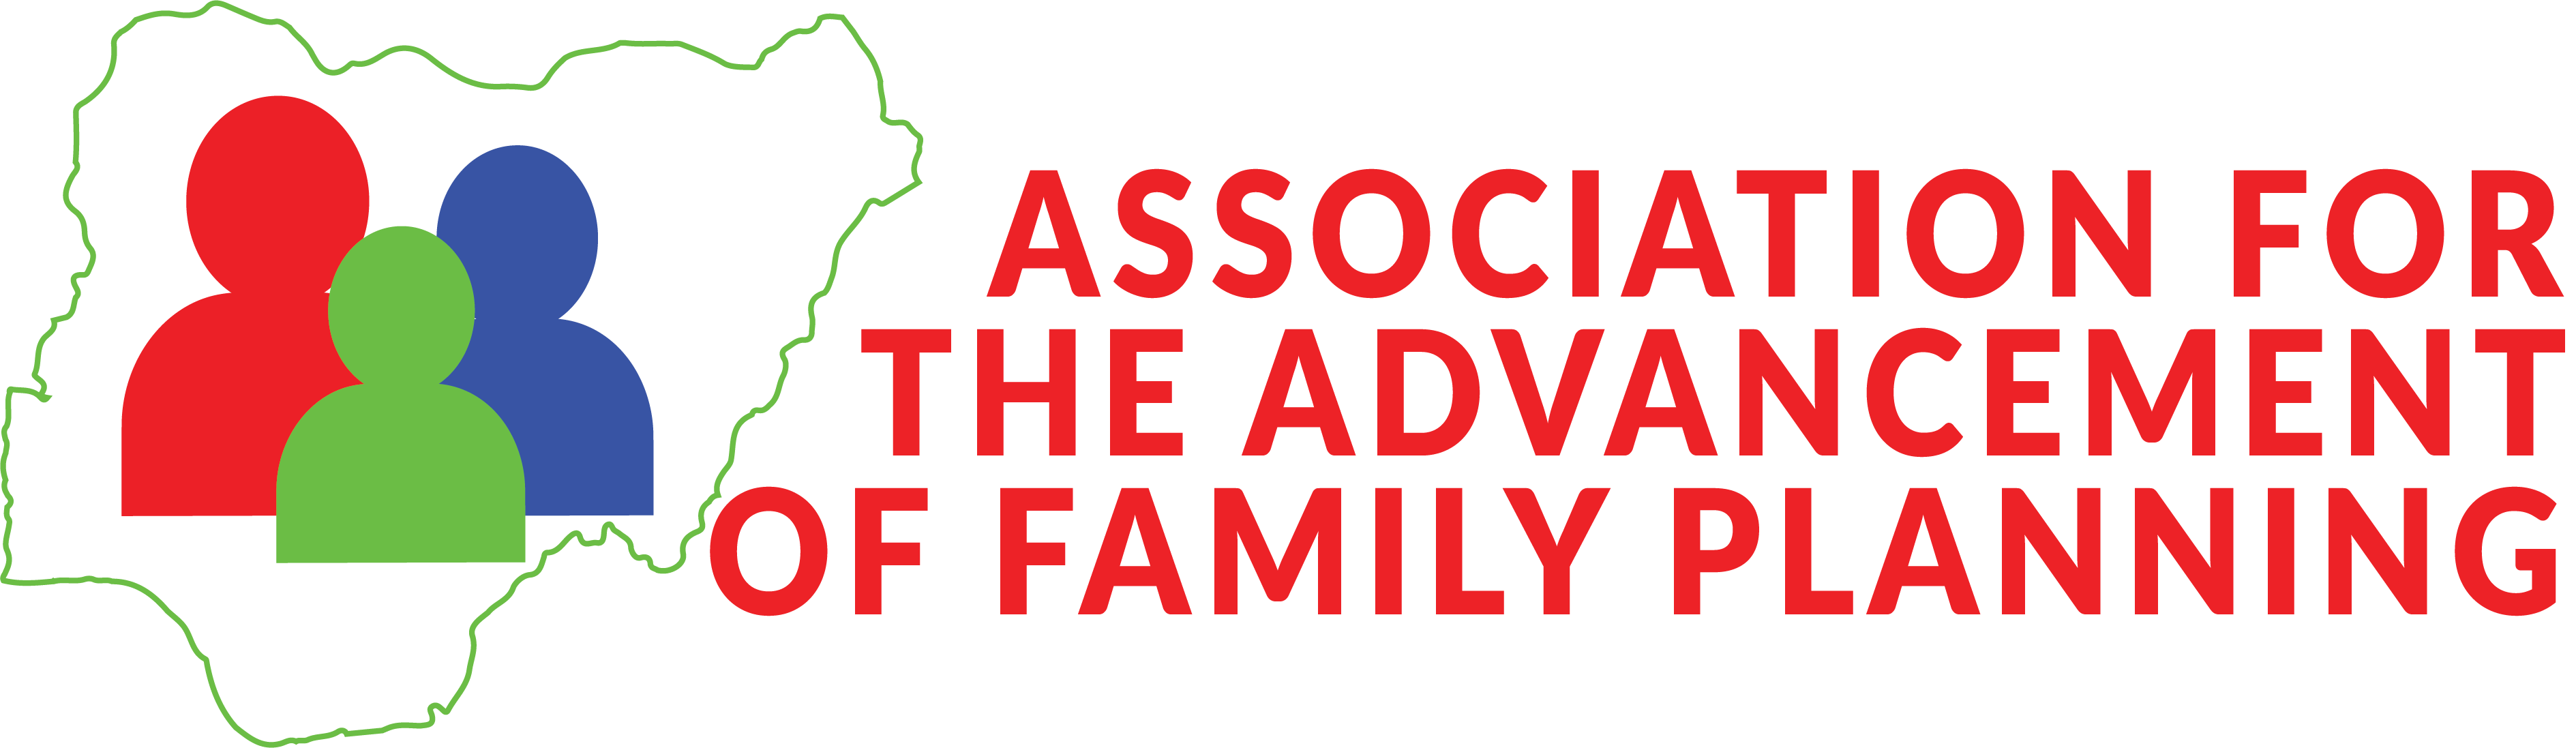 Association for the Advancement of Family Planning